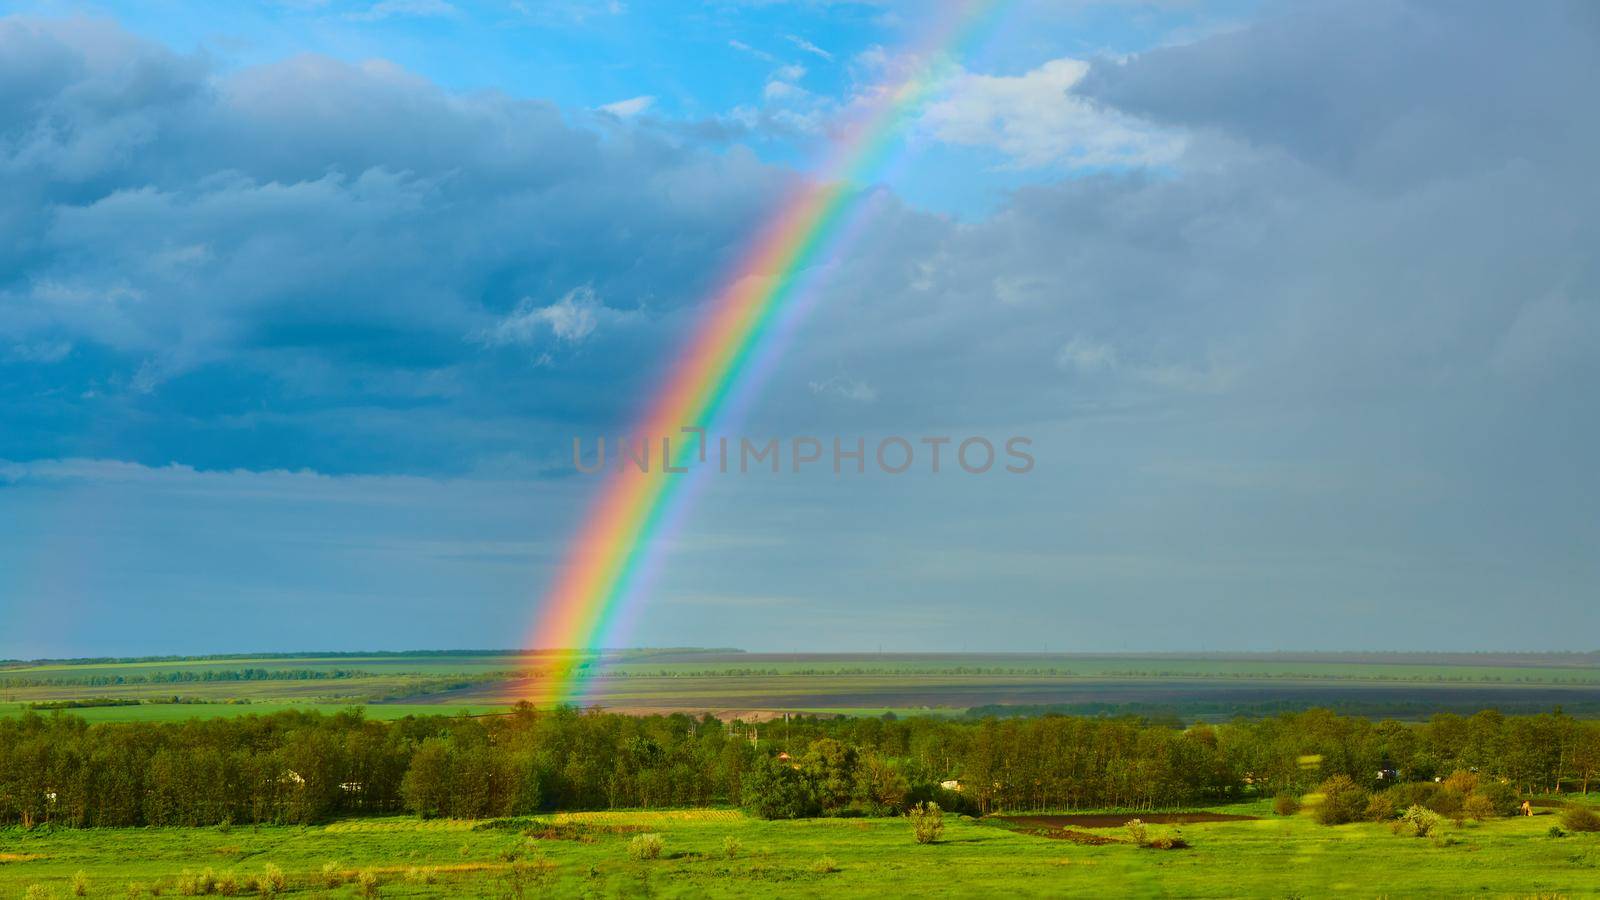 The Rainbow over Rural Landscape after Thunderstorm. by sarymsakov